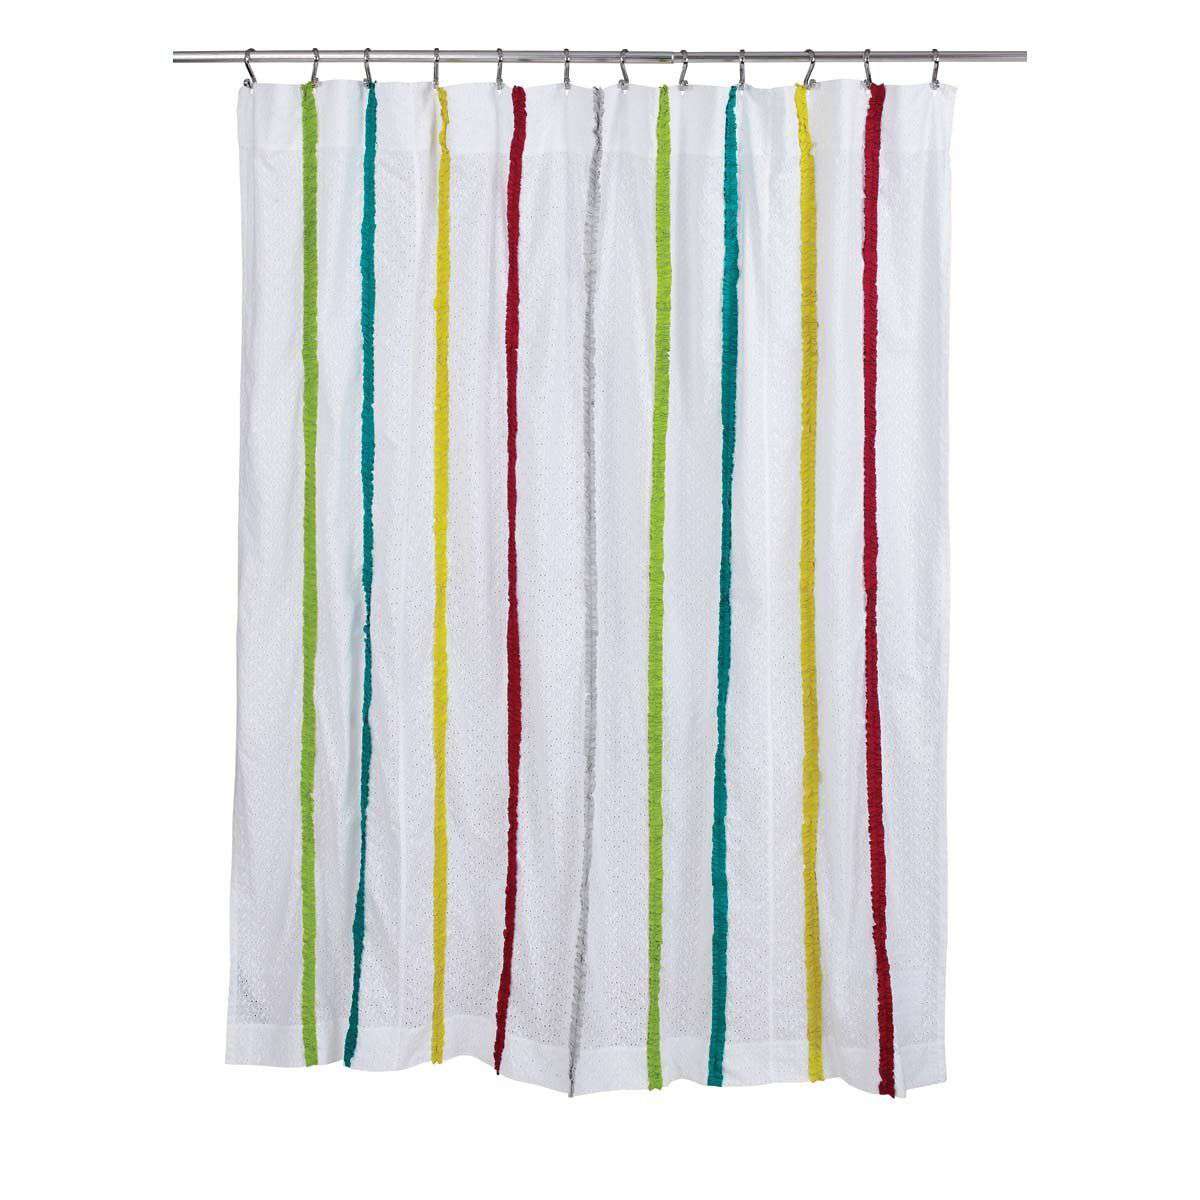 Everly Shower Curtain 72"x72" curtain VHC Brands 